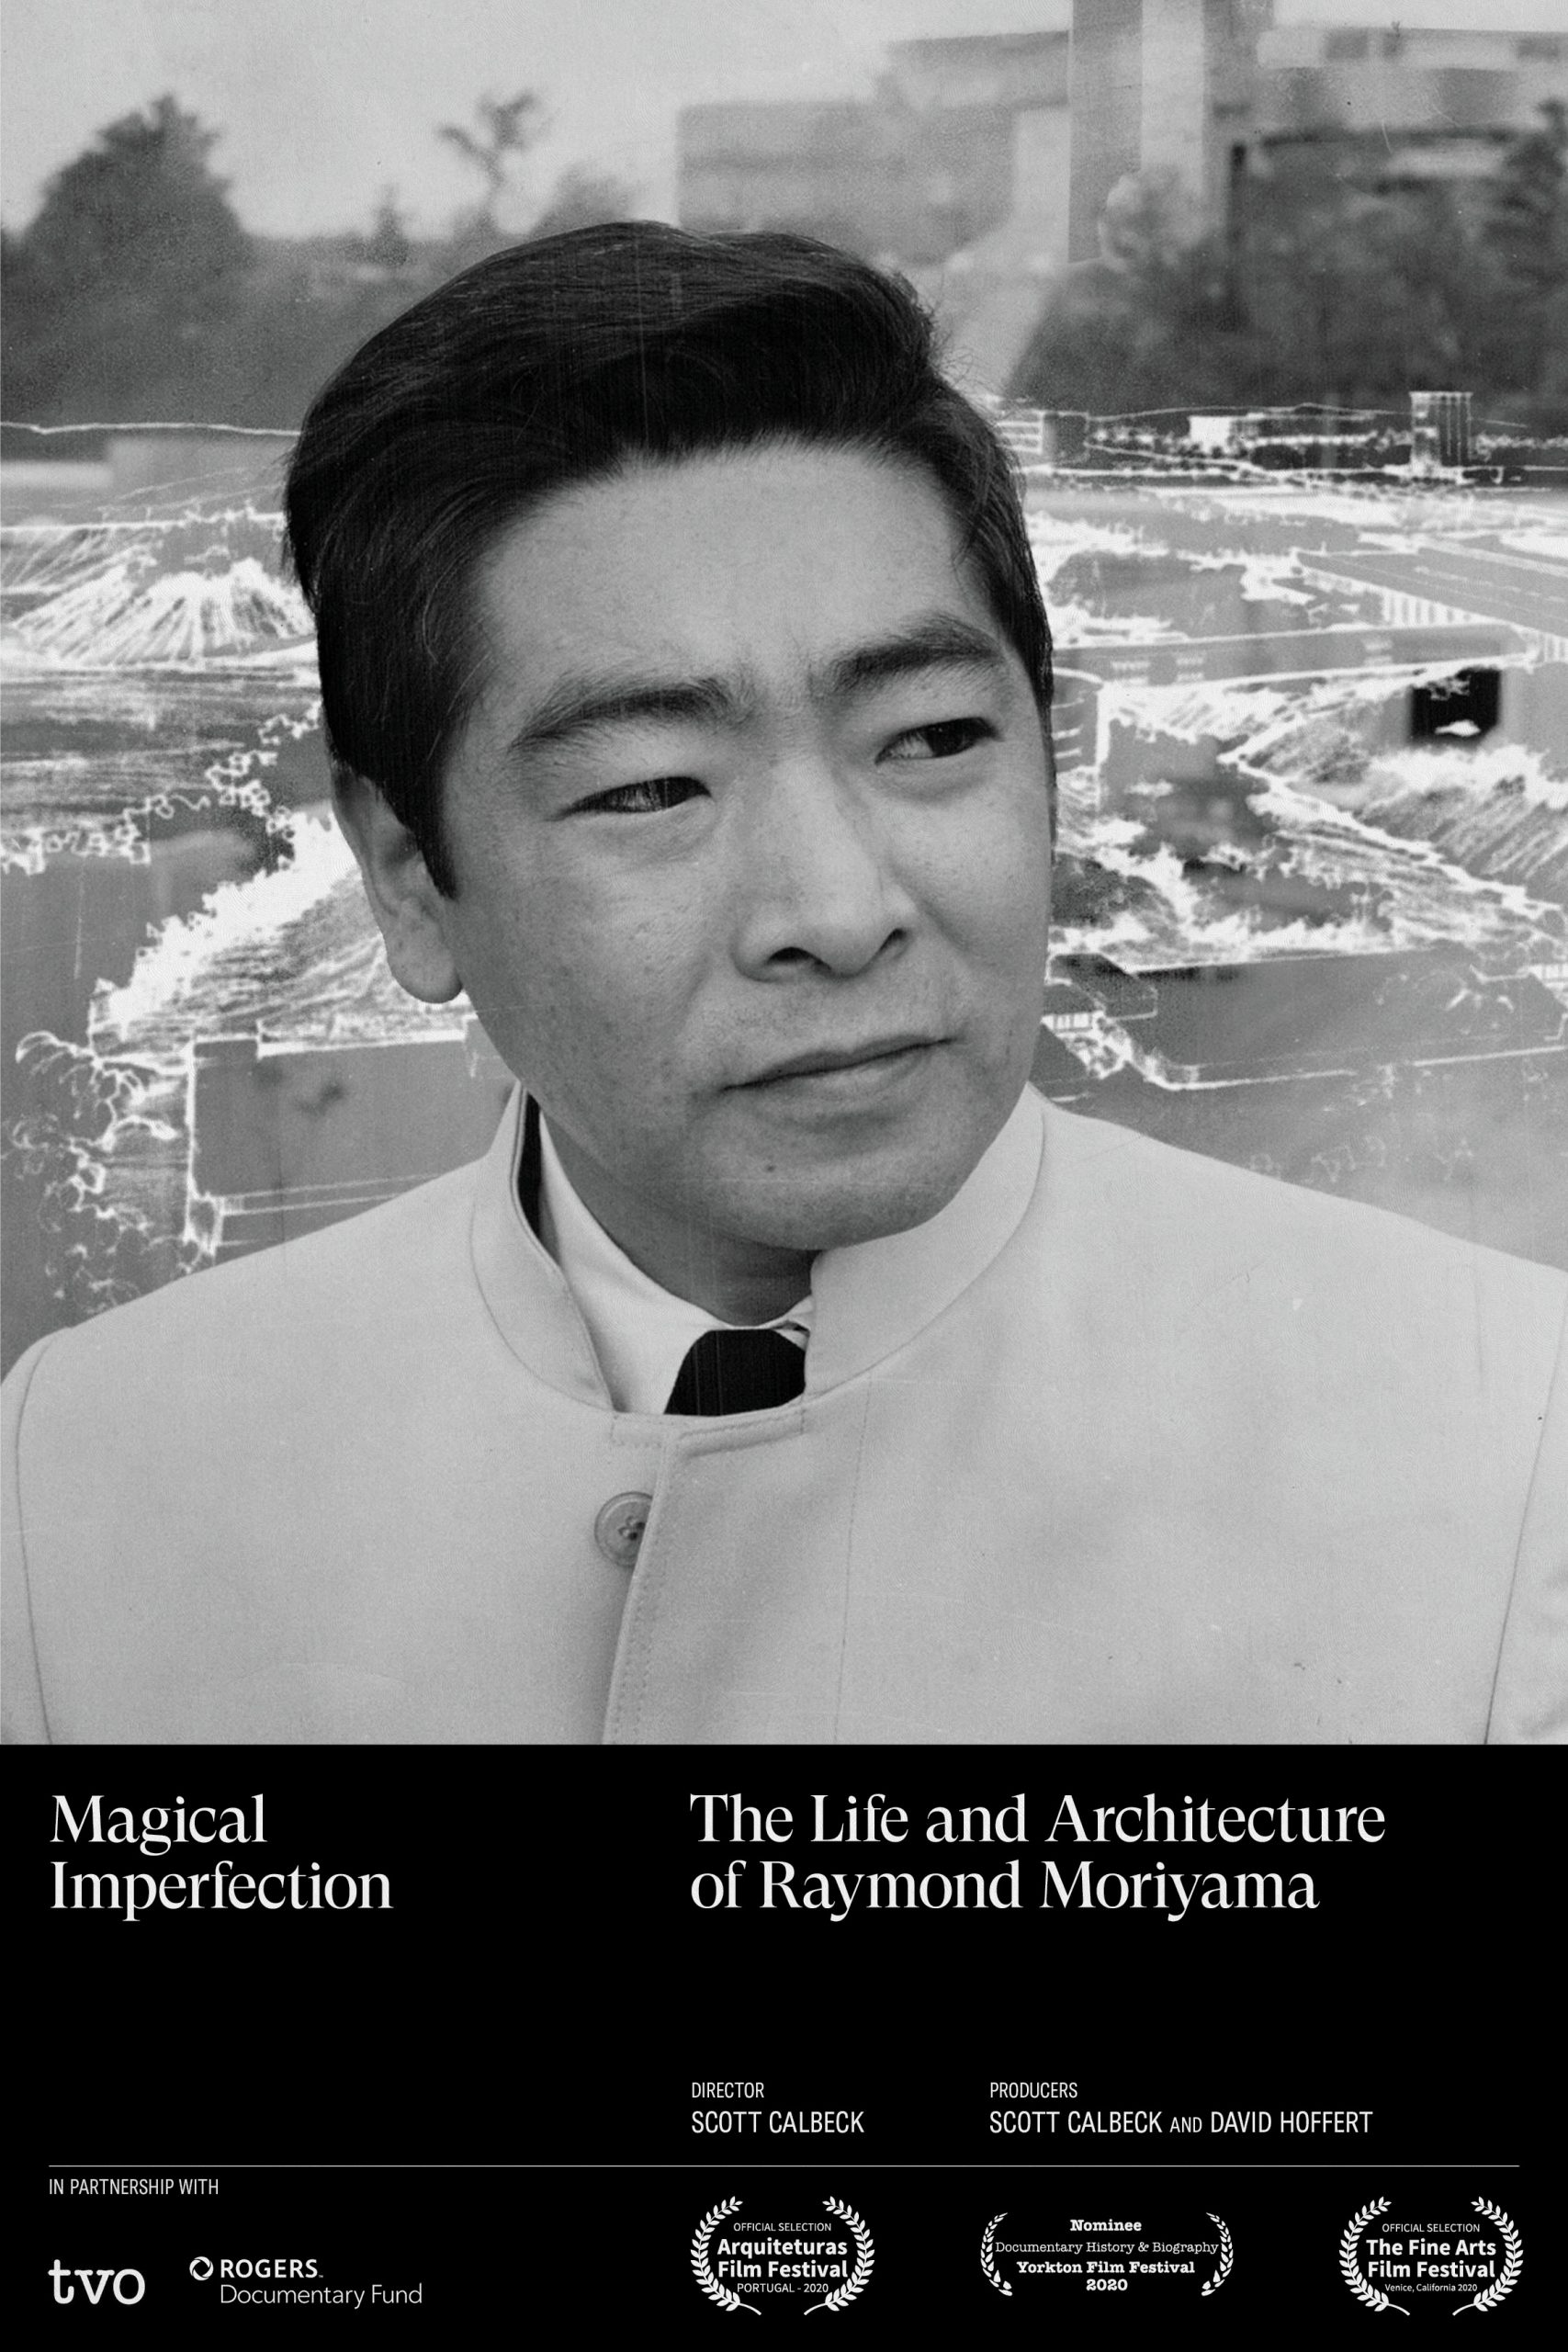 Magical Imperfection: The Life and Architecture of Raymond Moriyama